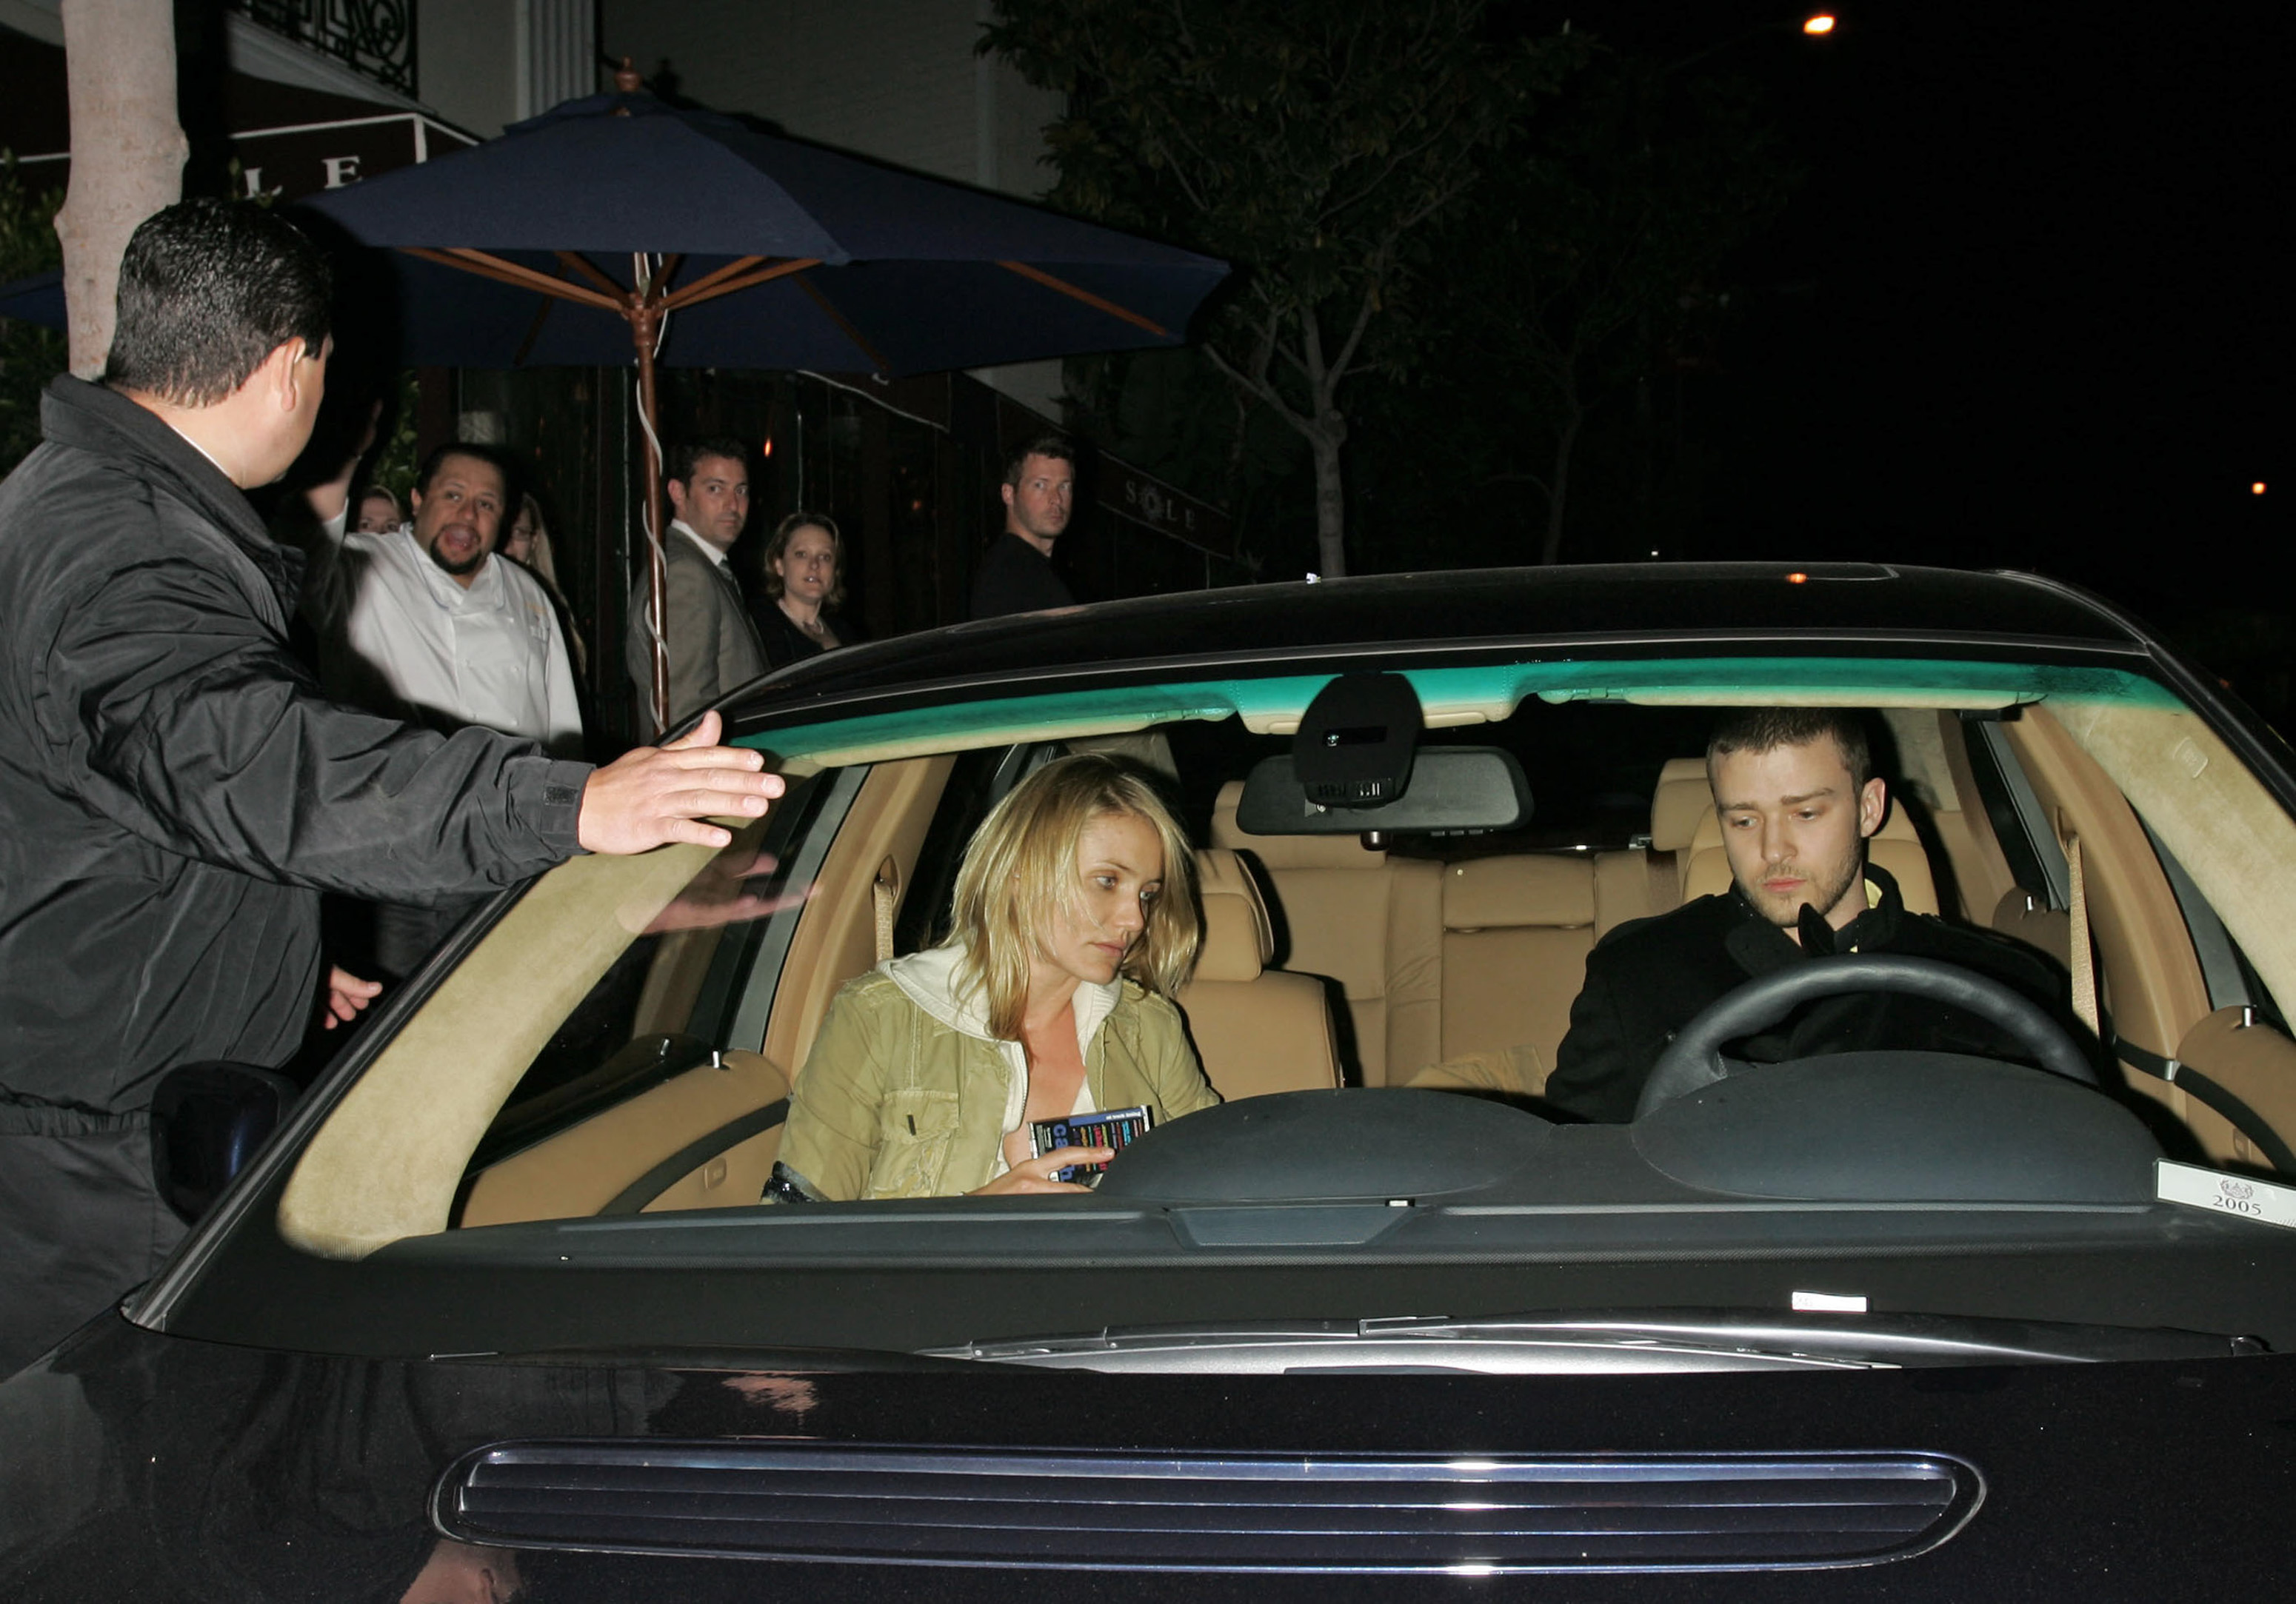 Cameron Diaz and Justin Timberlake seen in Los Angeles, California on April 27, 2005 | Source: Getty Images